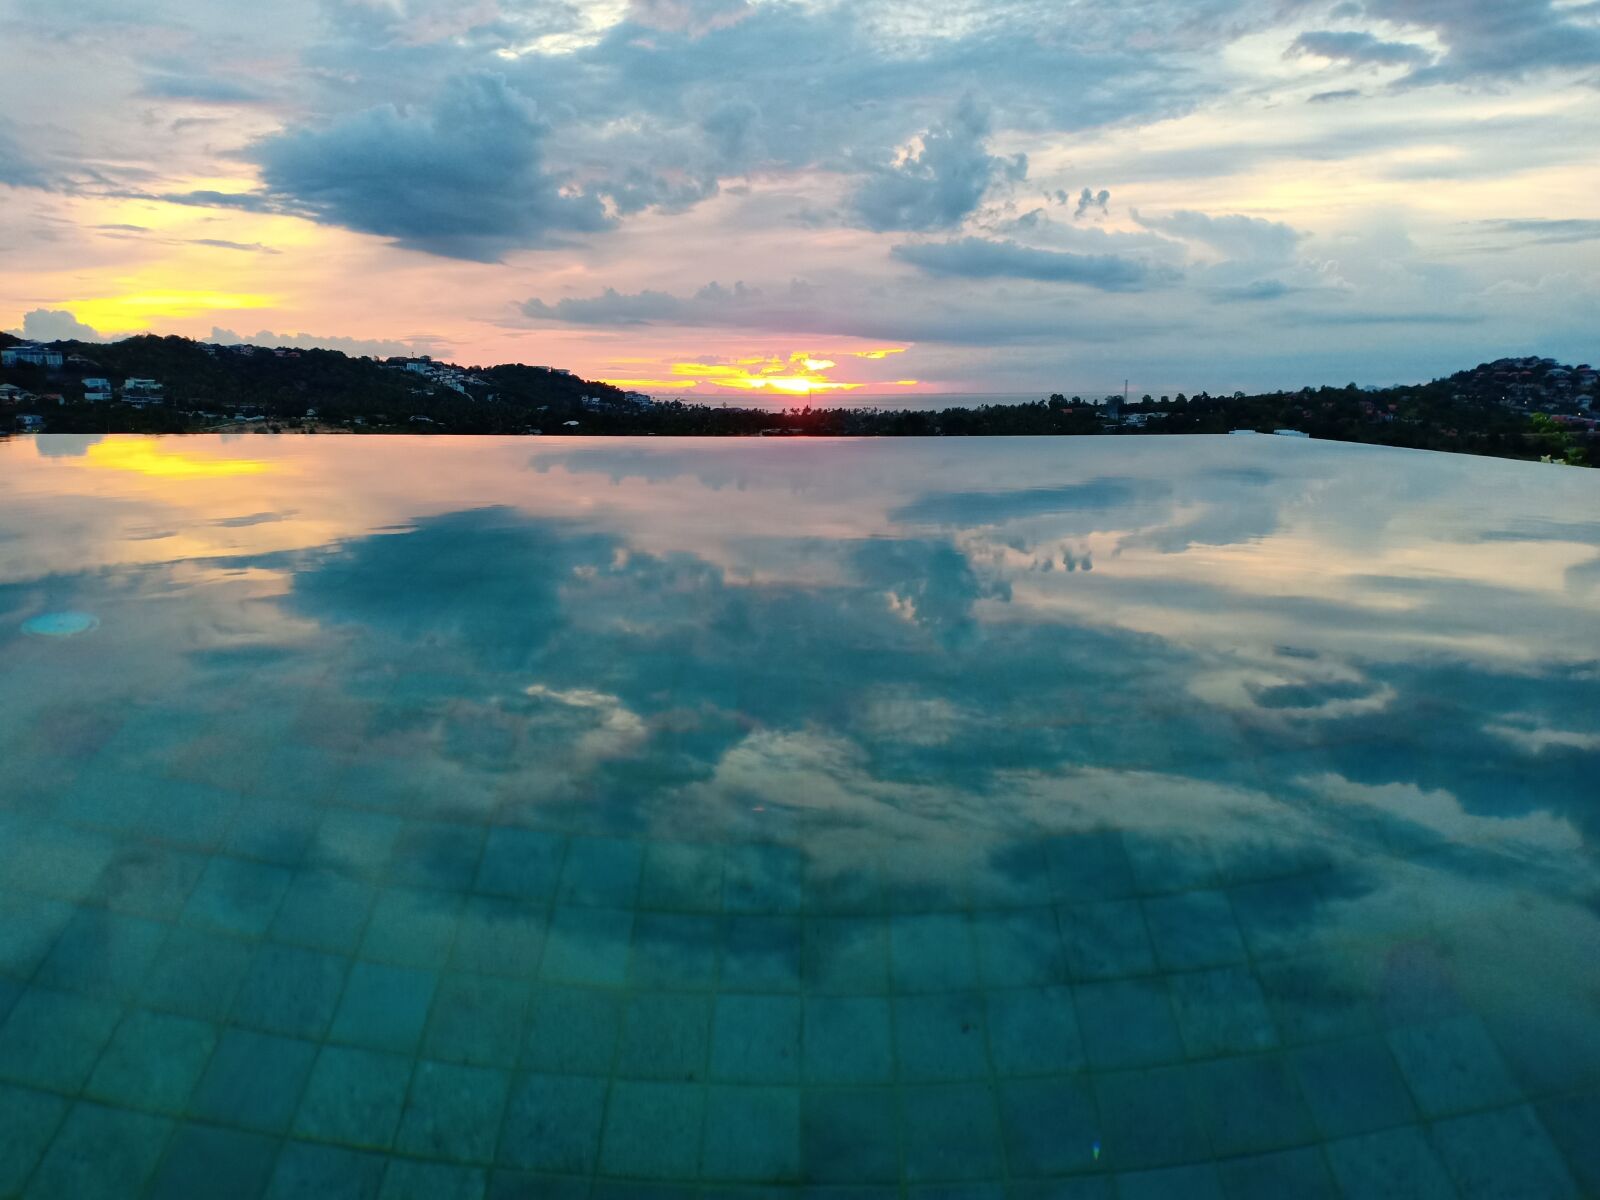 OPPO F9 sample photo. Infinity pool, sunset, weather photography